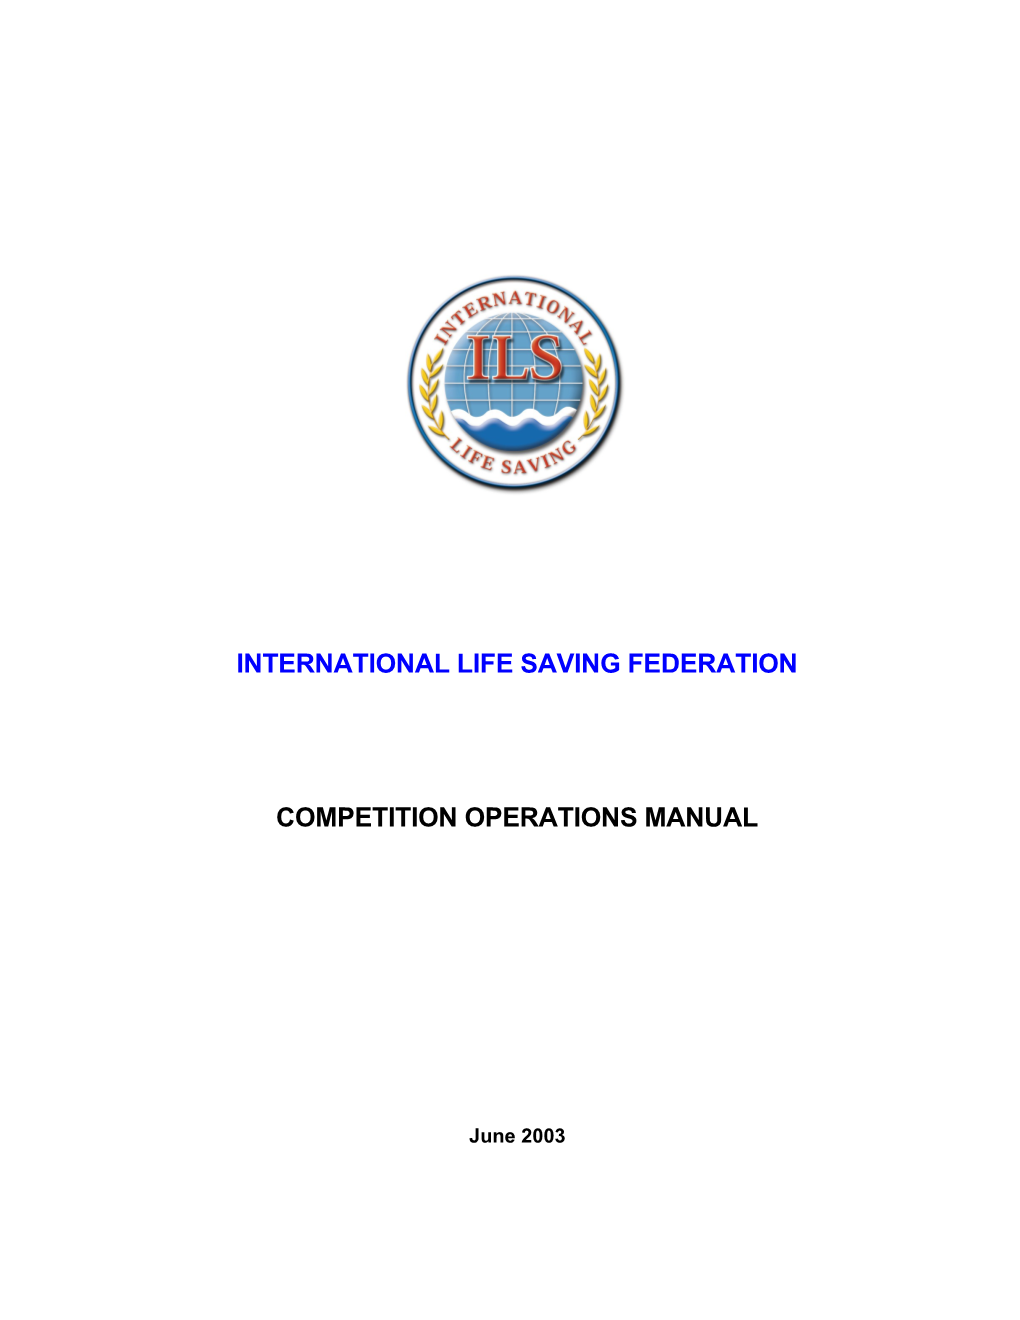 Competition Operations Manual